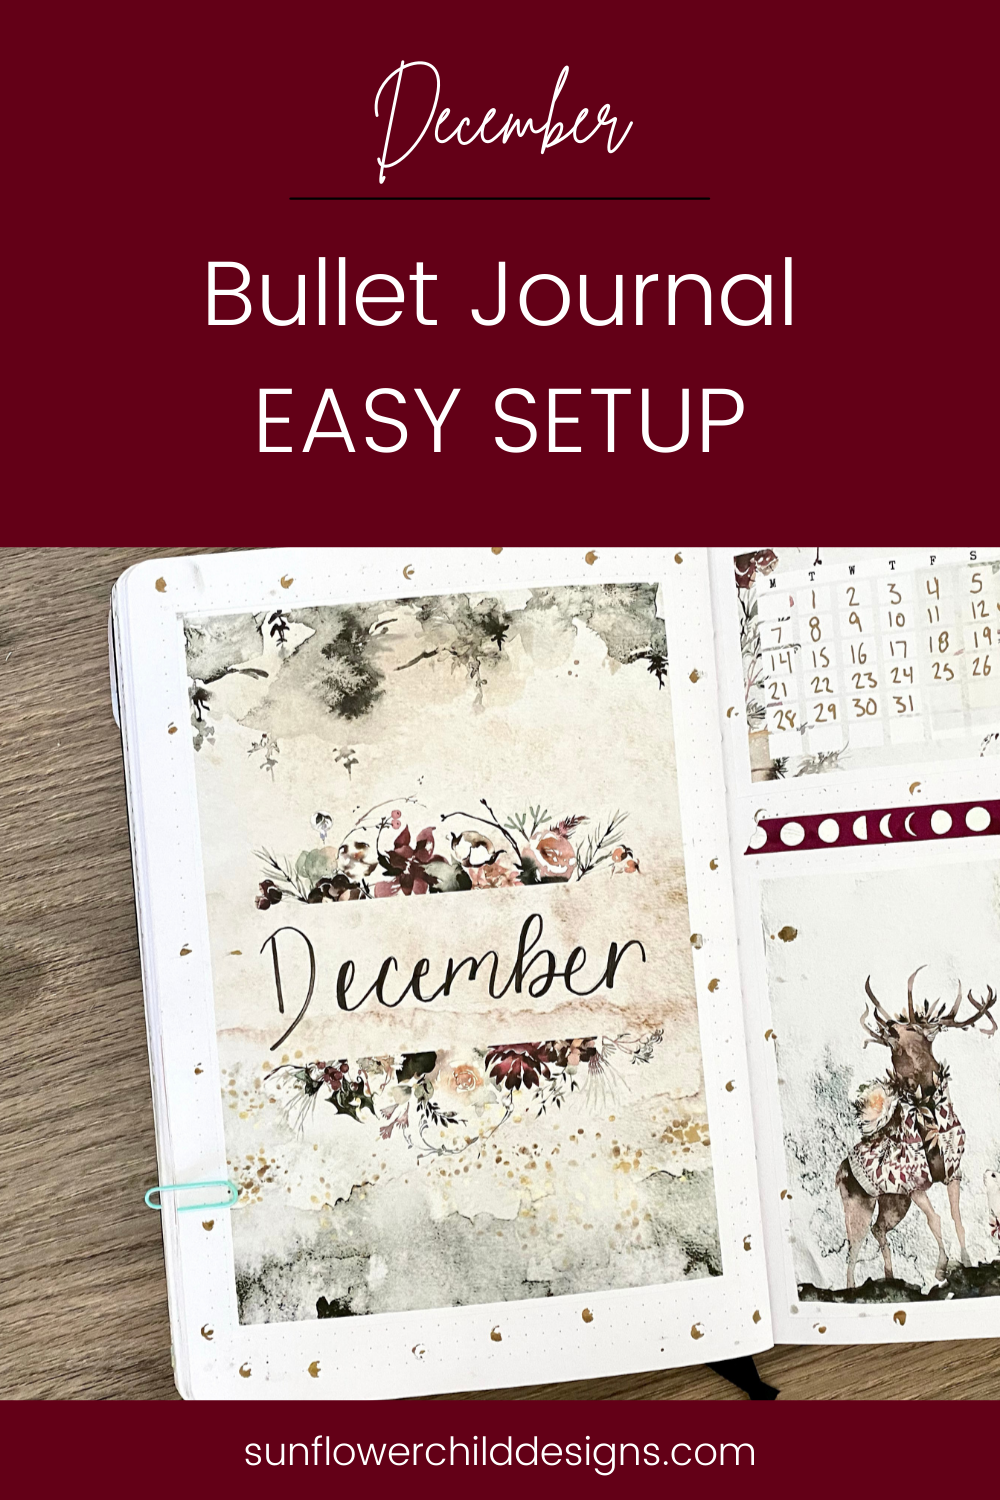 december-bullet-journal-ideas-using-printable-planner-stickers 8.png